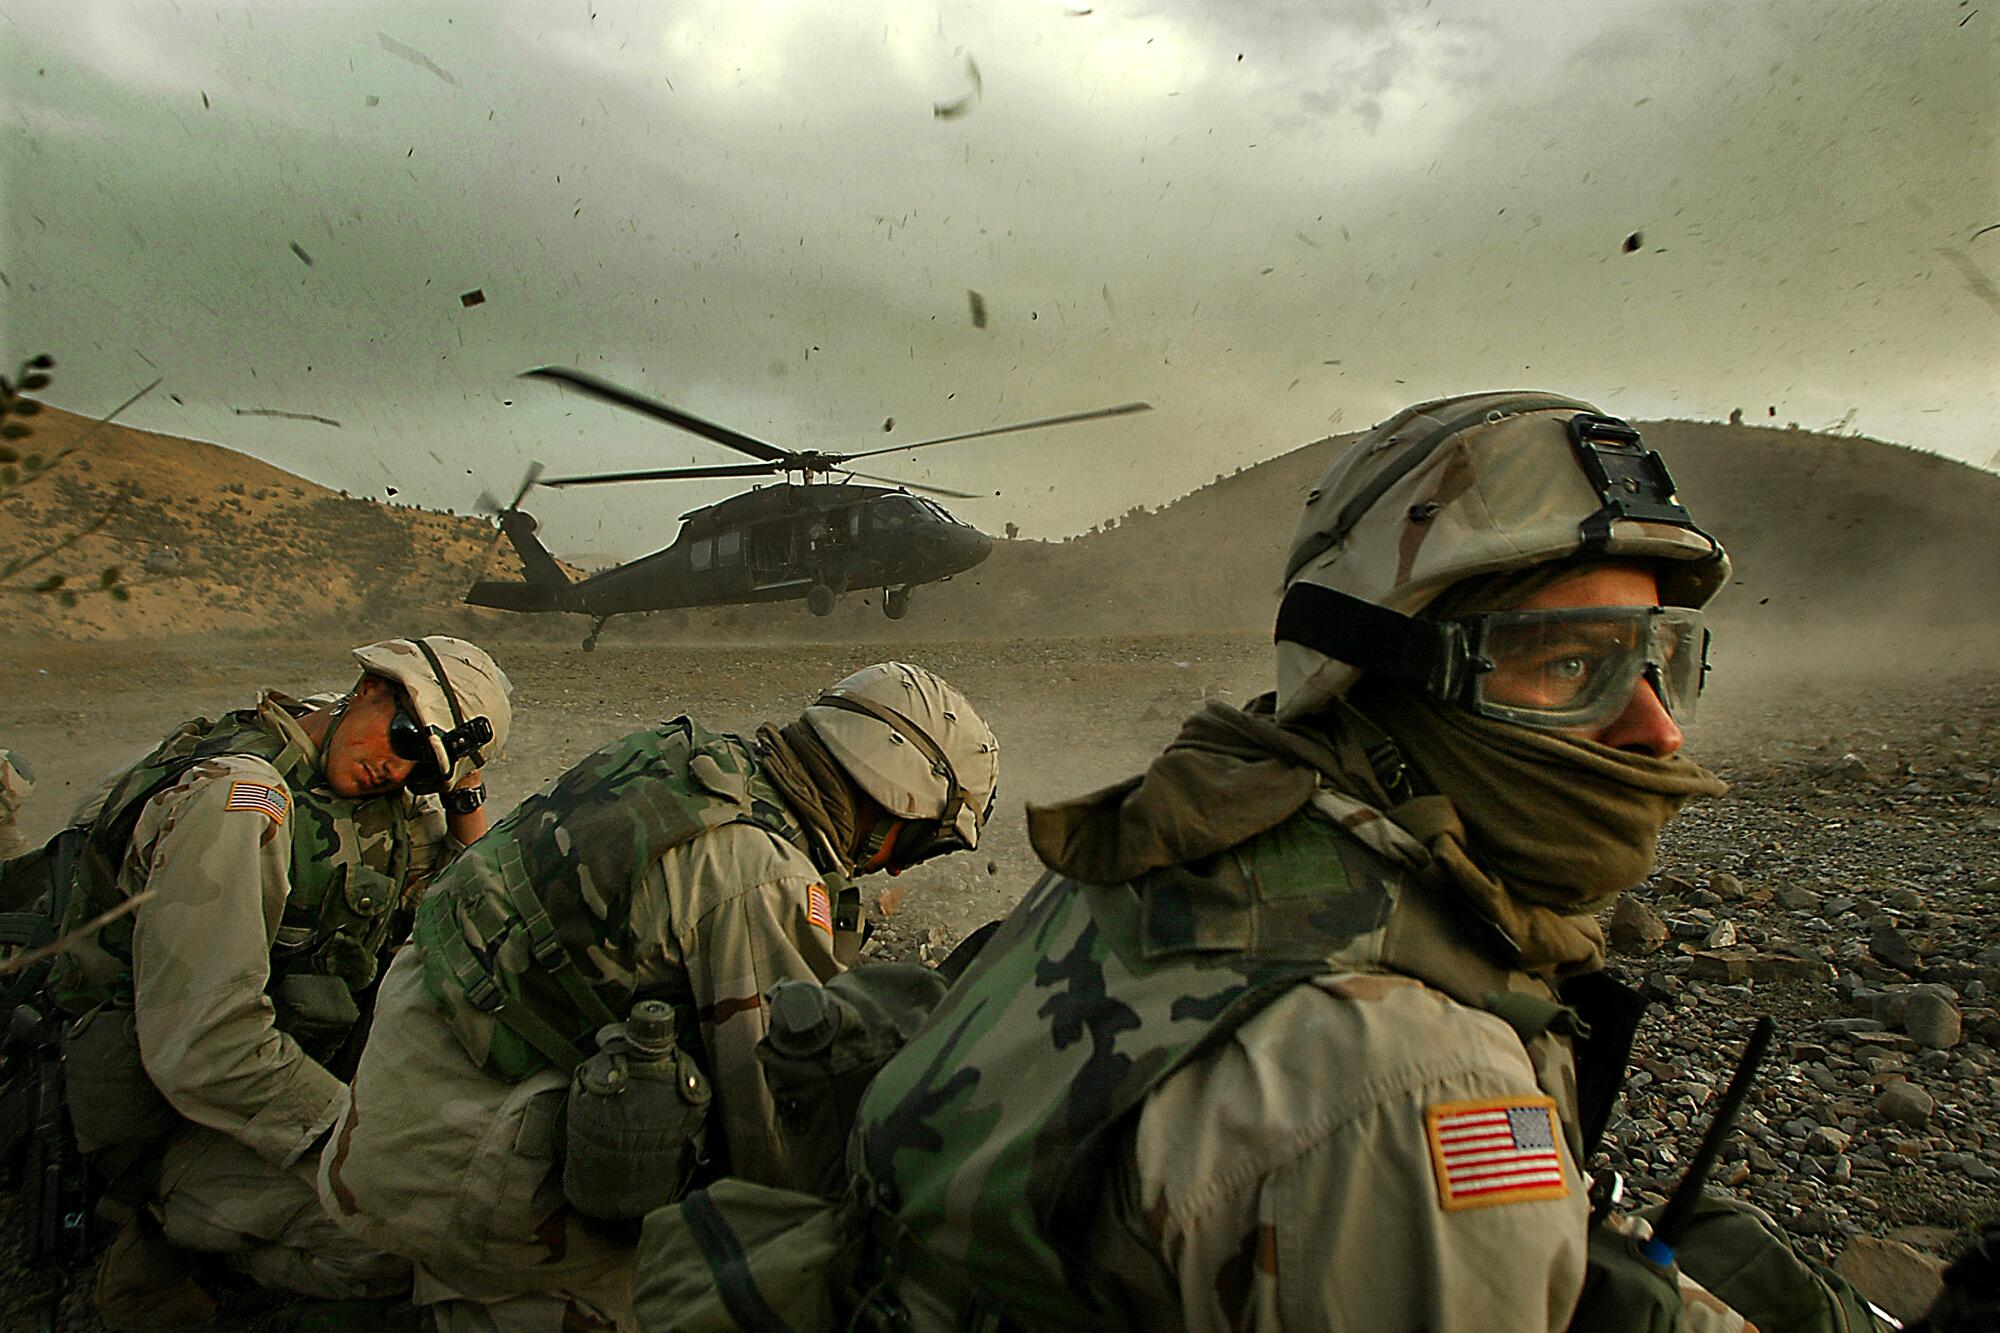 Soldiers turn their heads away from a landing helicopter kicking up dust and debris